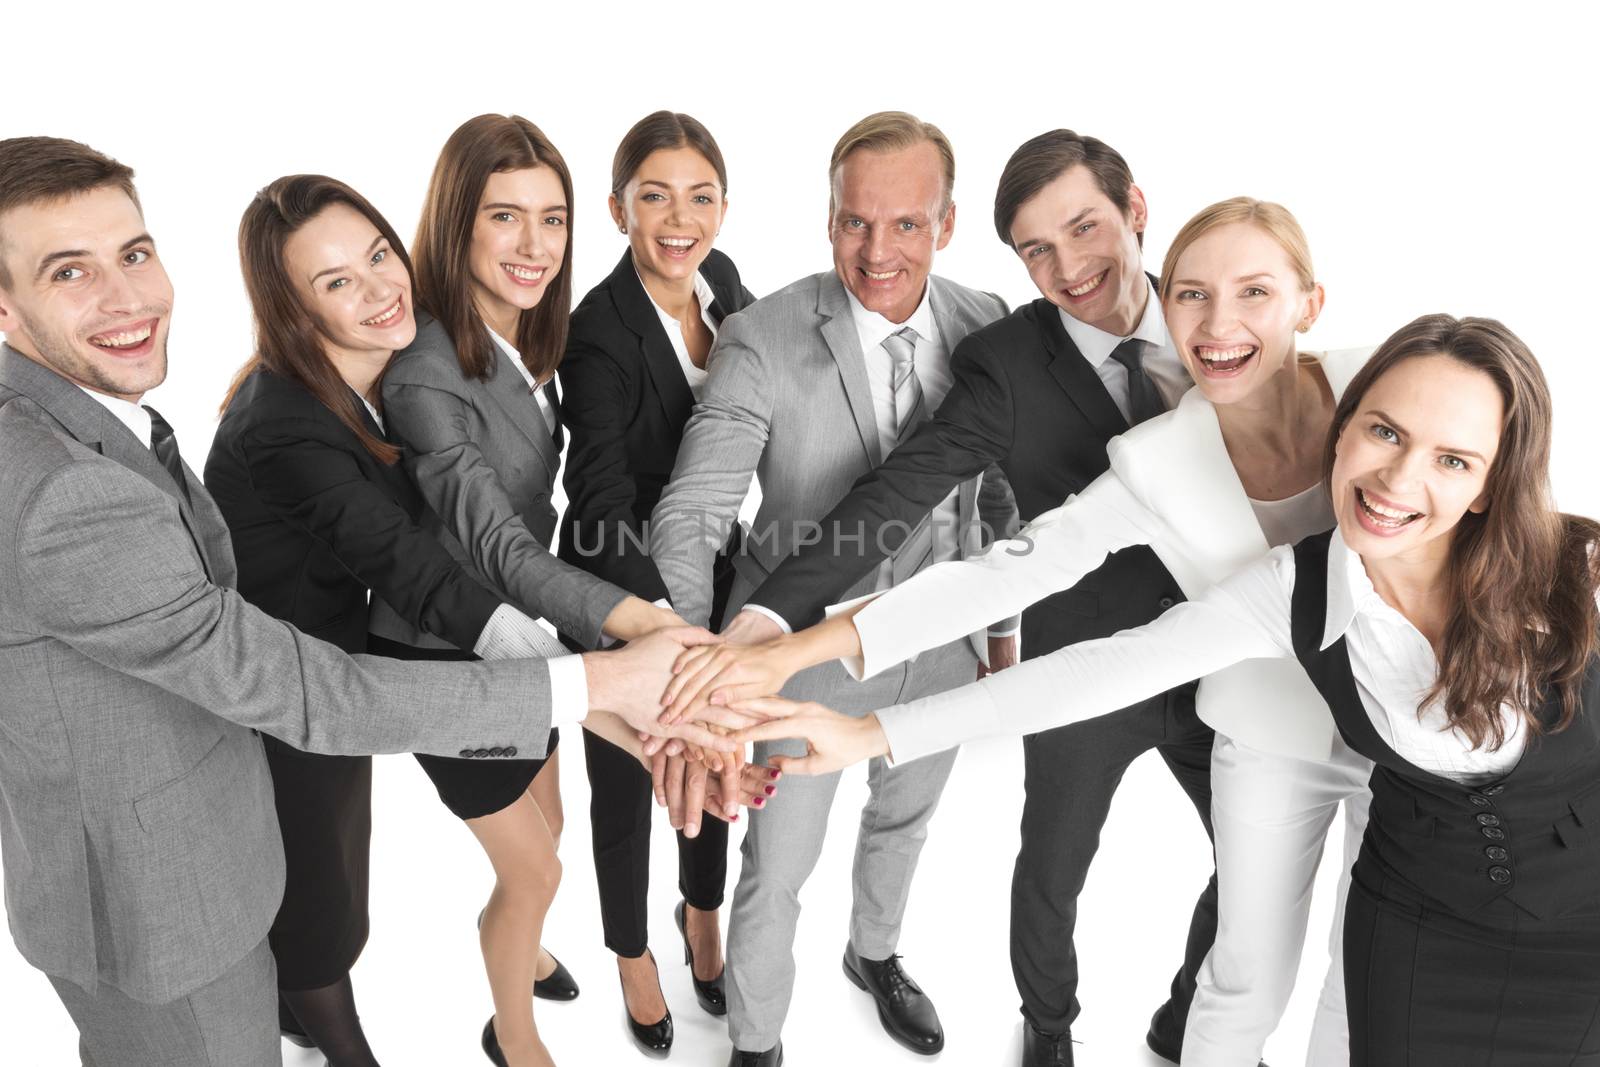 Concept of teamwork. Business people team joined hands, isolated on white background